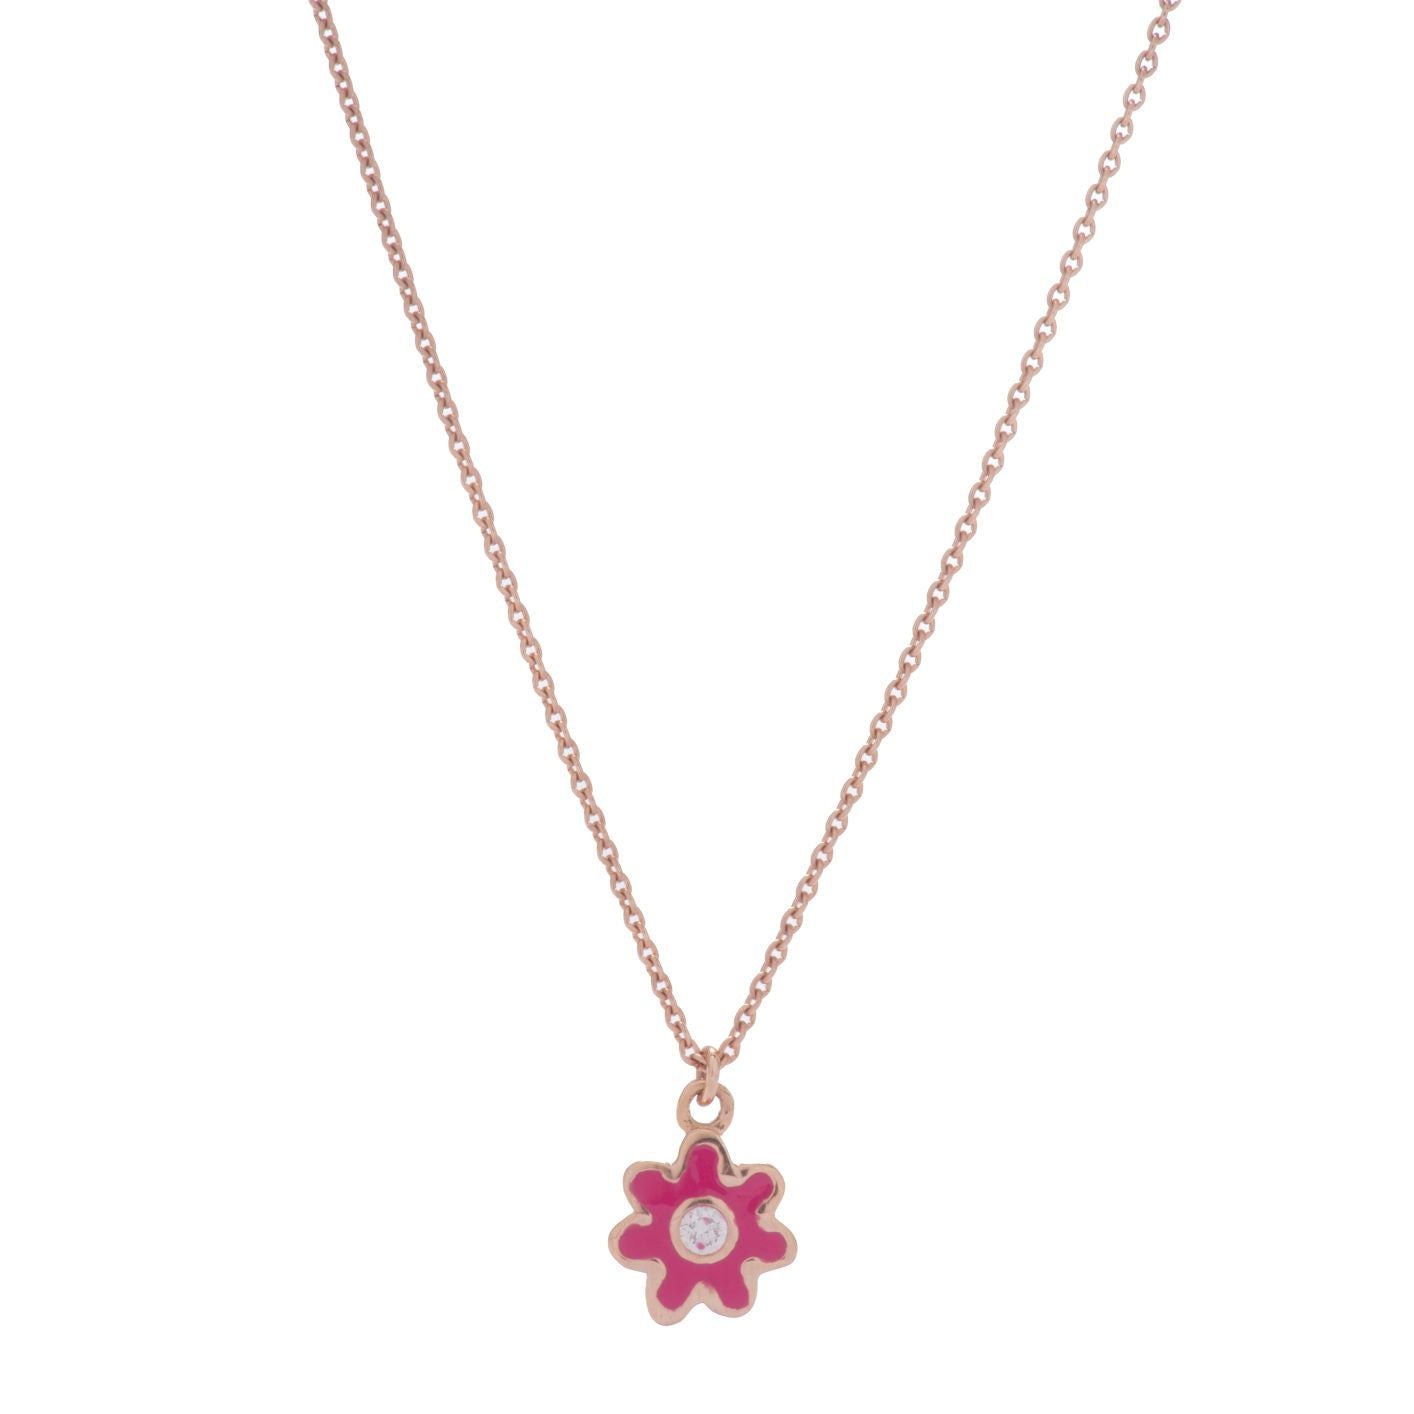 Kid's Pink Flower Shaped Necklace in Yellow 18 K Gold - NB0893